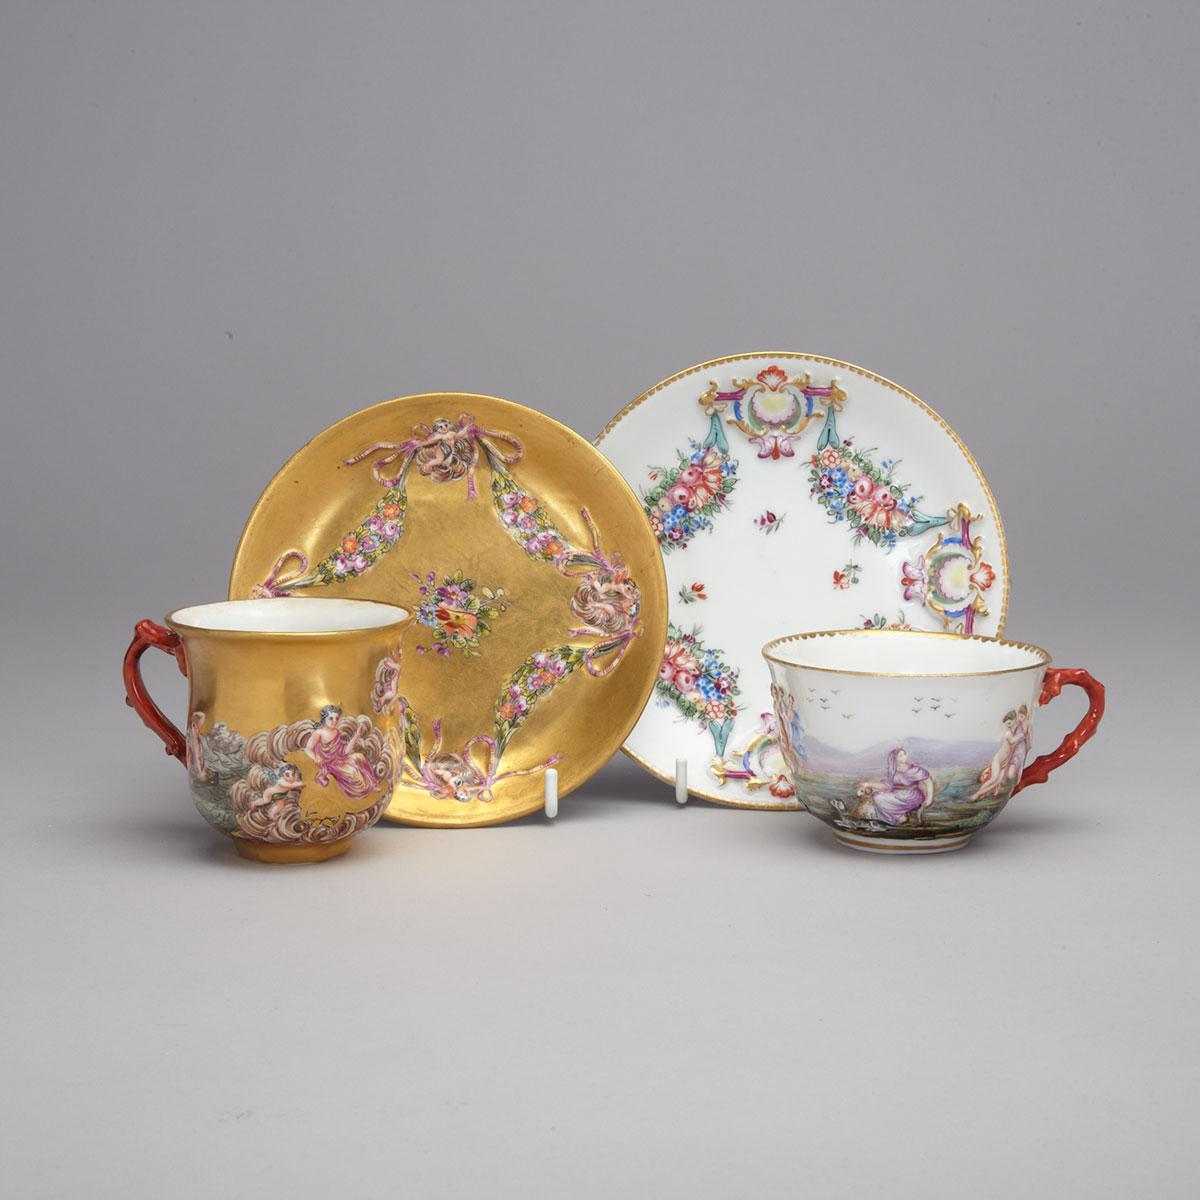 Two ‘Naples’ Cups and Saucers, c.1900